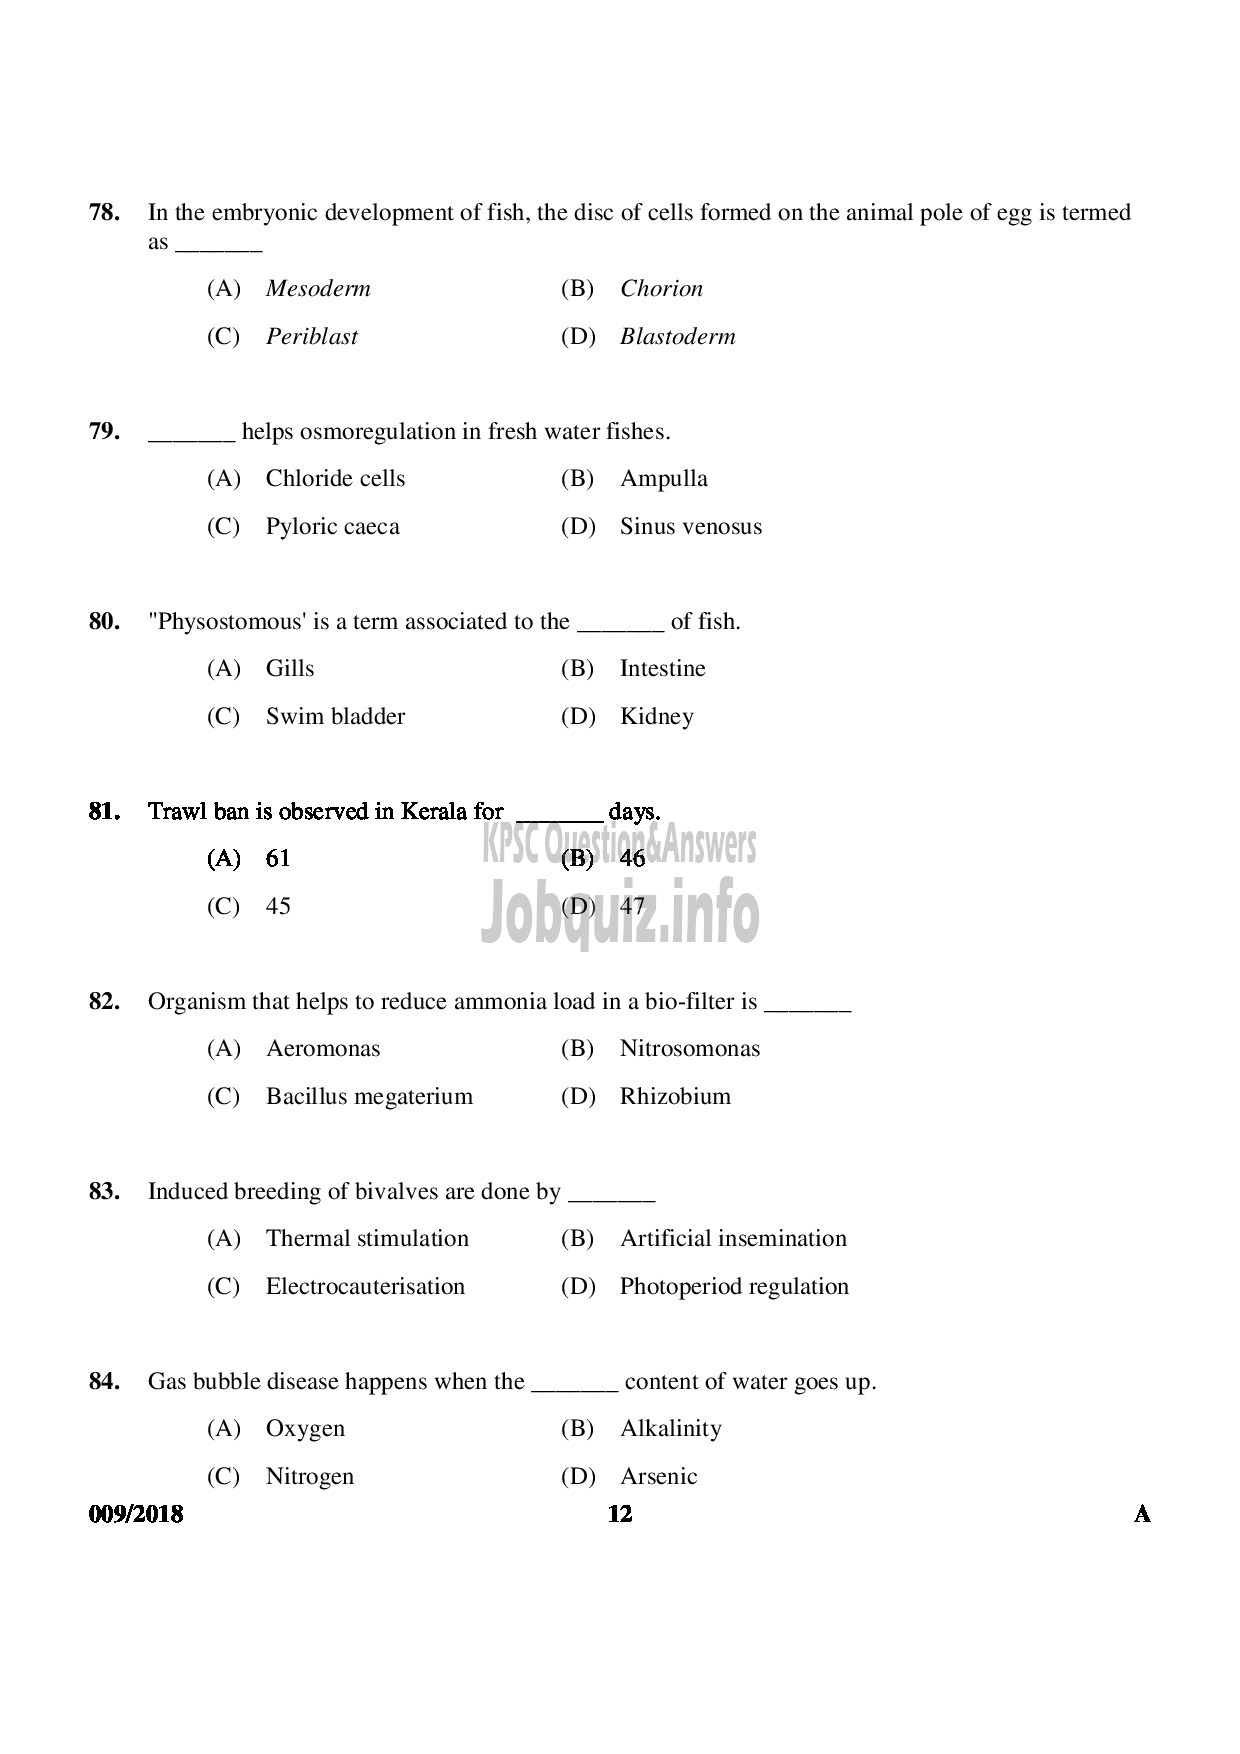 Kerala PSC Question Paper - VOCATIONAL INSTRUCTOR IN FISHERIES VOCATIONAL HIGHER SECONDARY EDUCATION-12